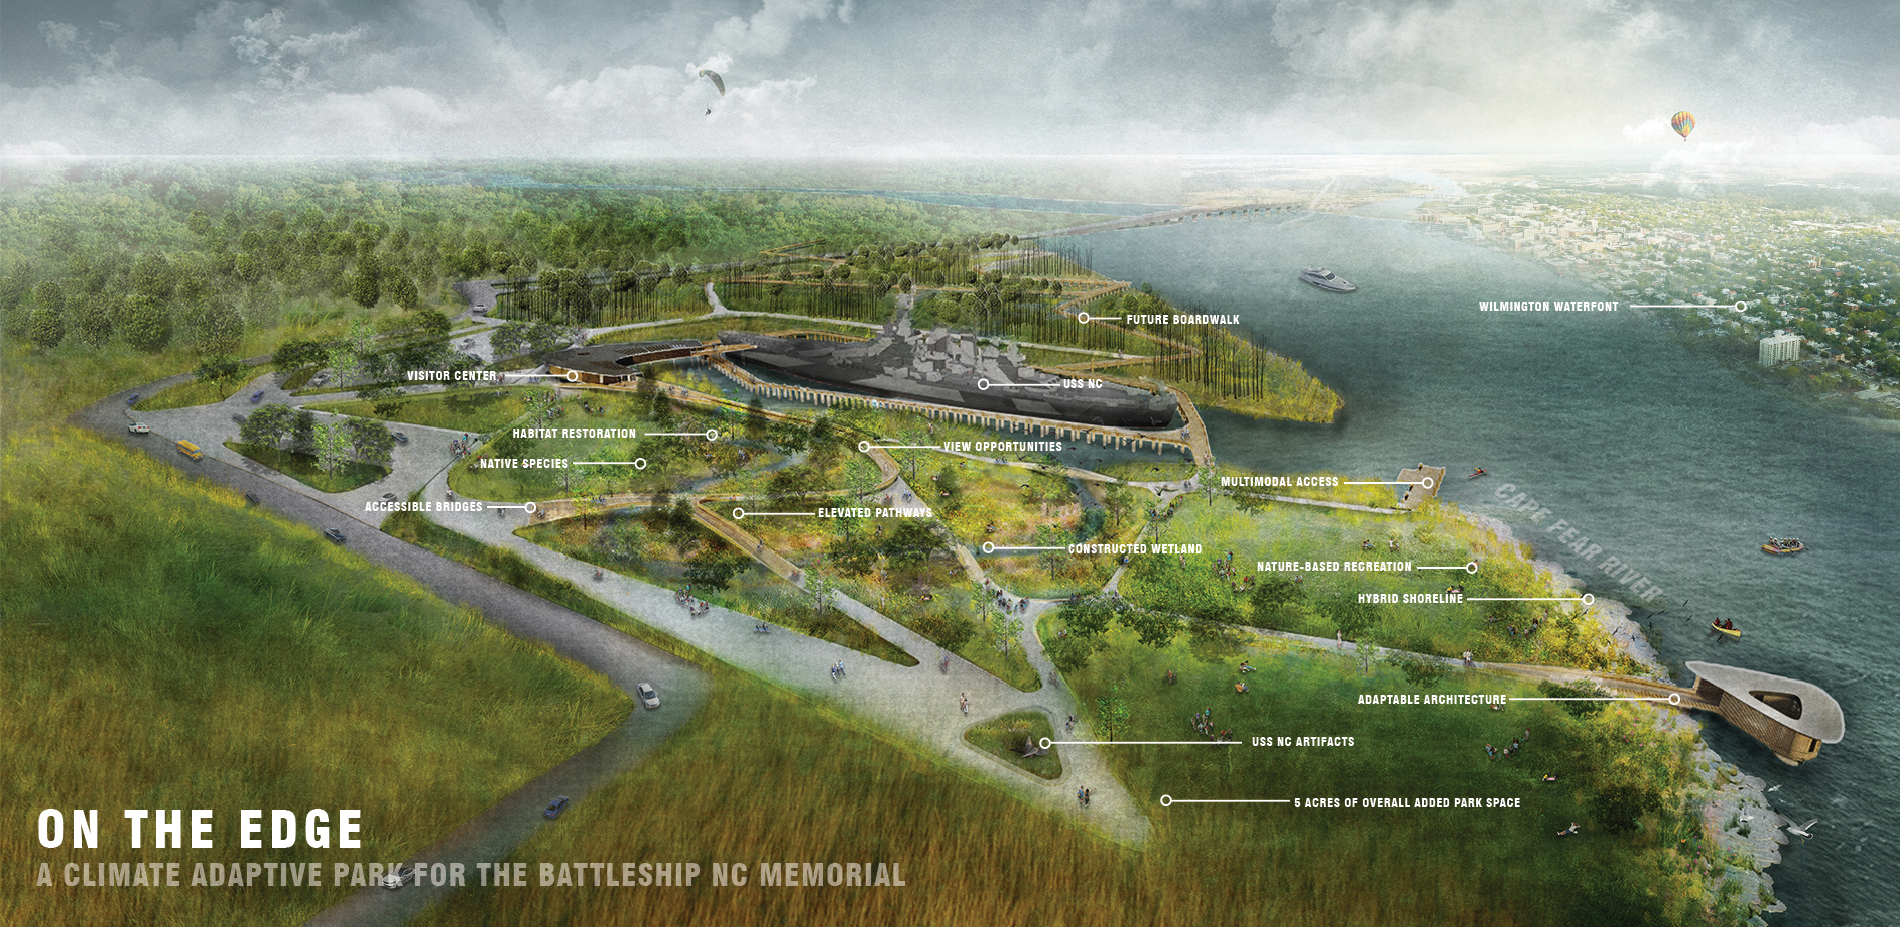 On the Edge: a Climate Adaptive Park for the Battleship NC Memorial